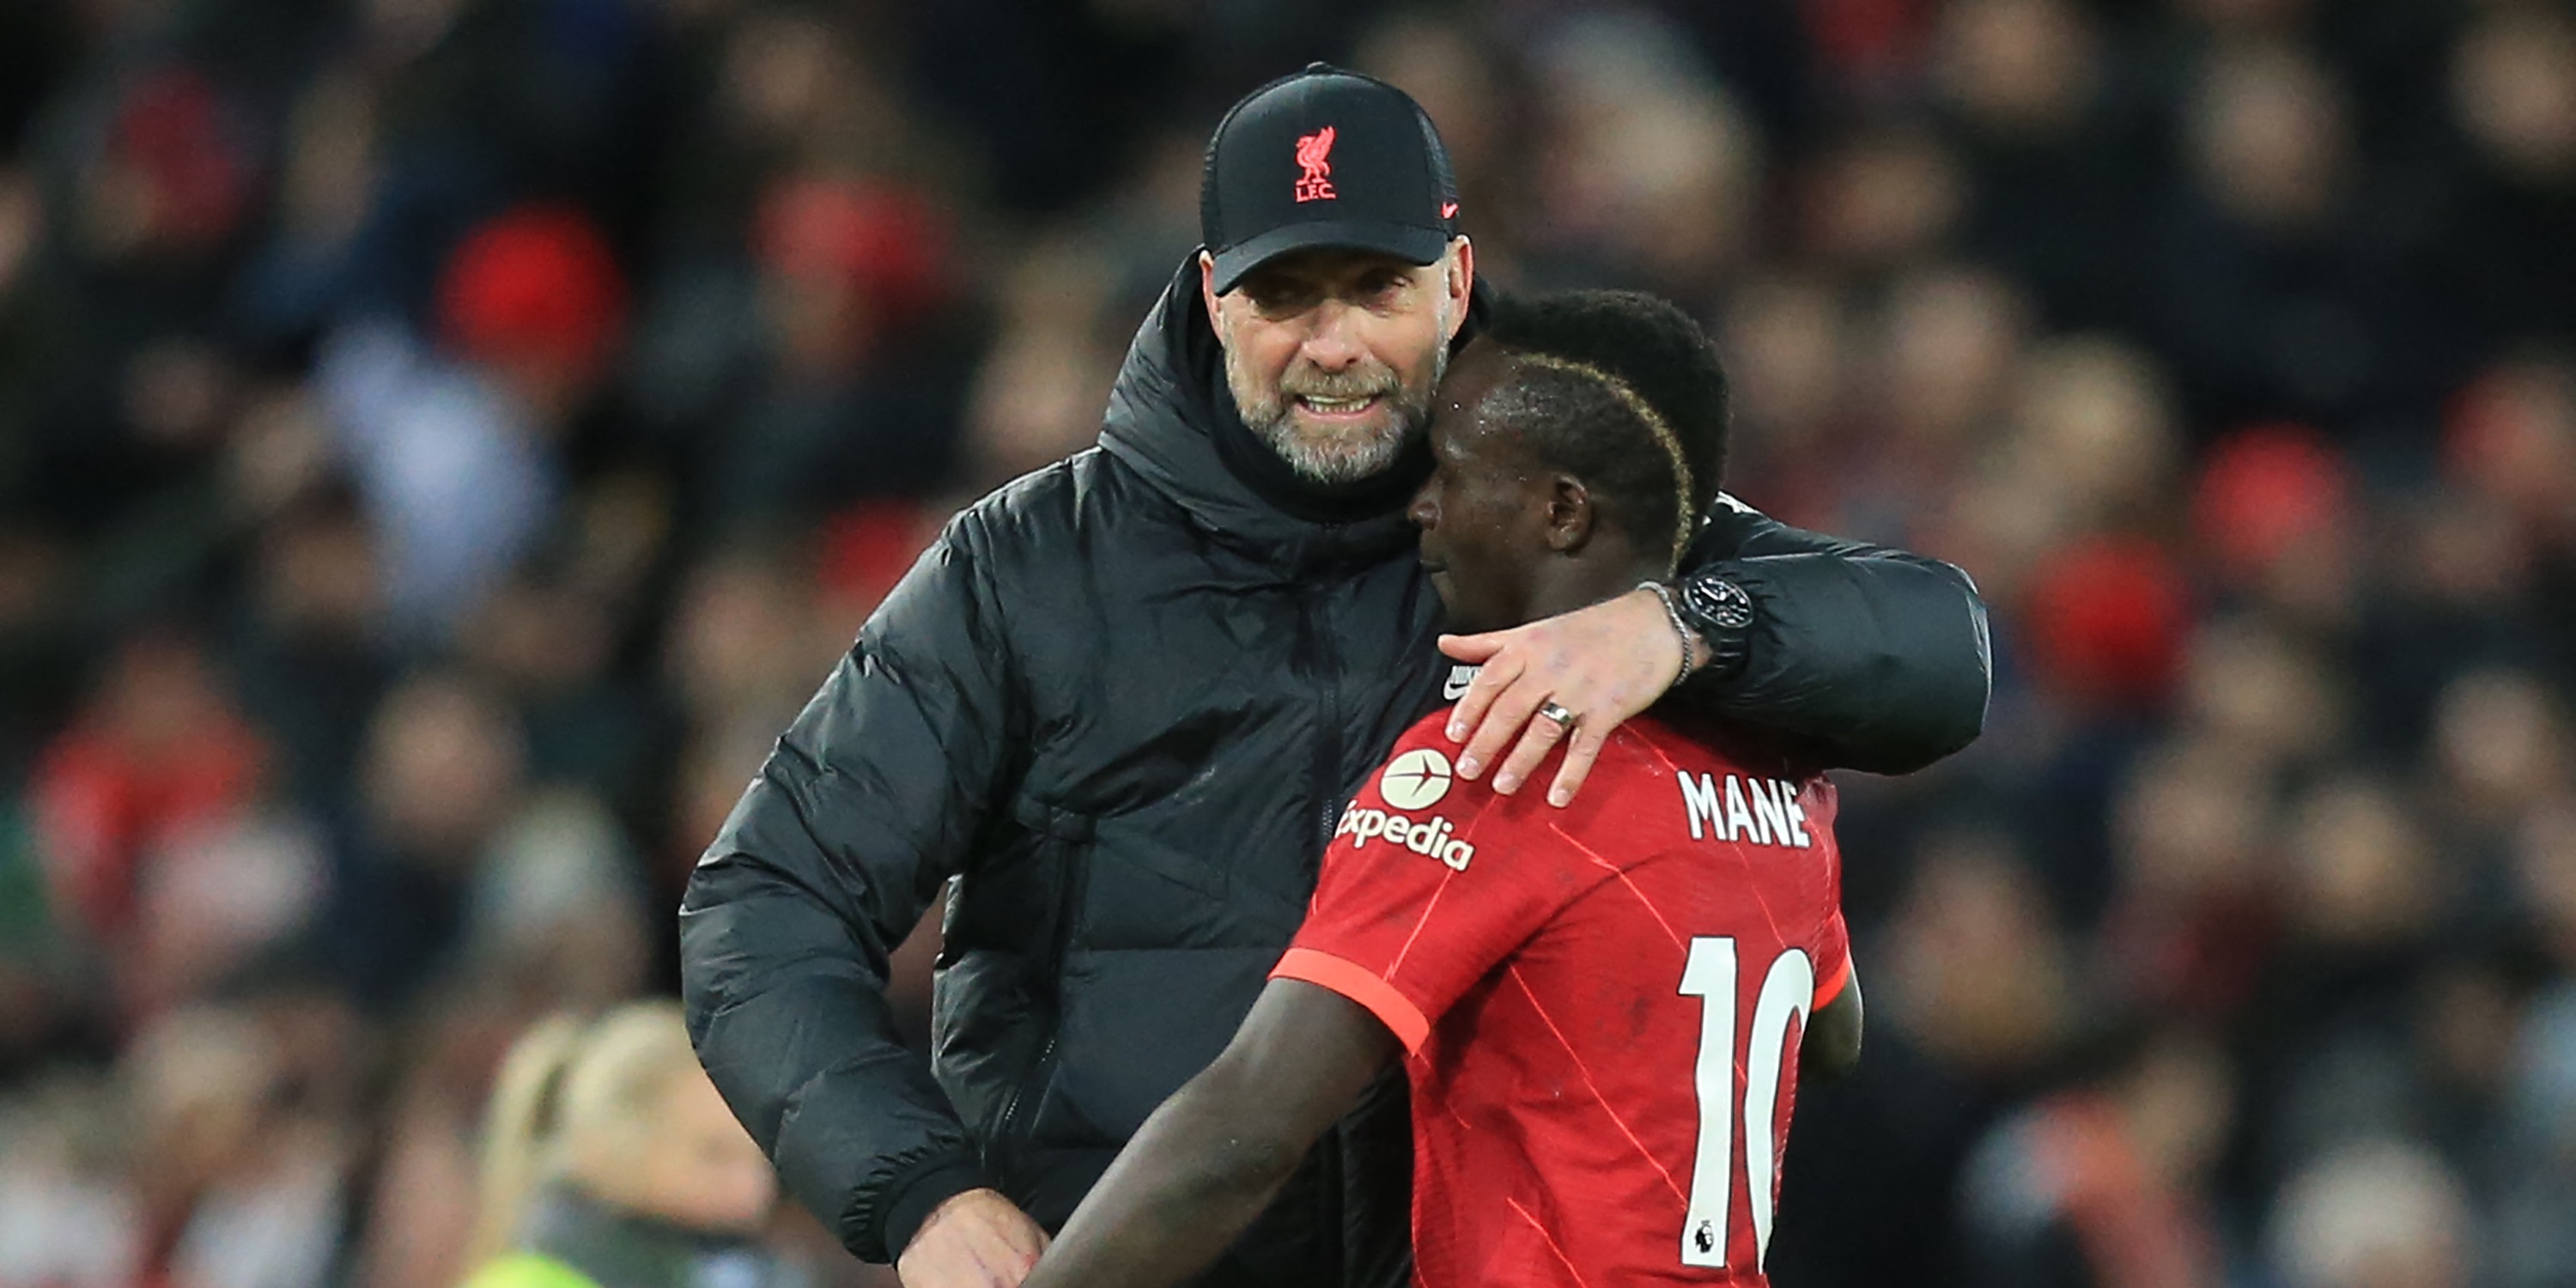 Danny Murphy weighs in on Liverpool’s ‘clever’ transfer activity and discusses how the Reds can adapt to life without Sadio Mane